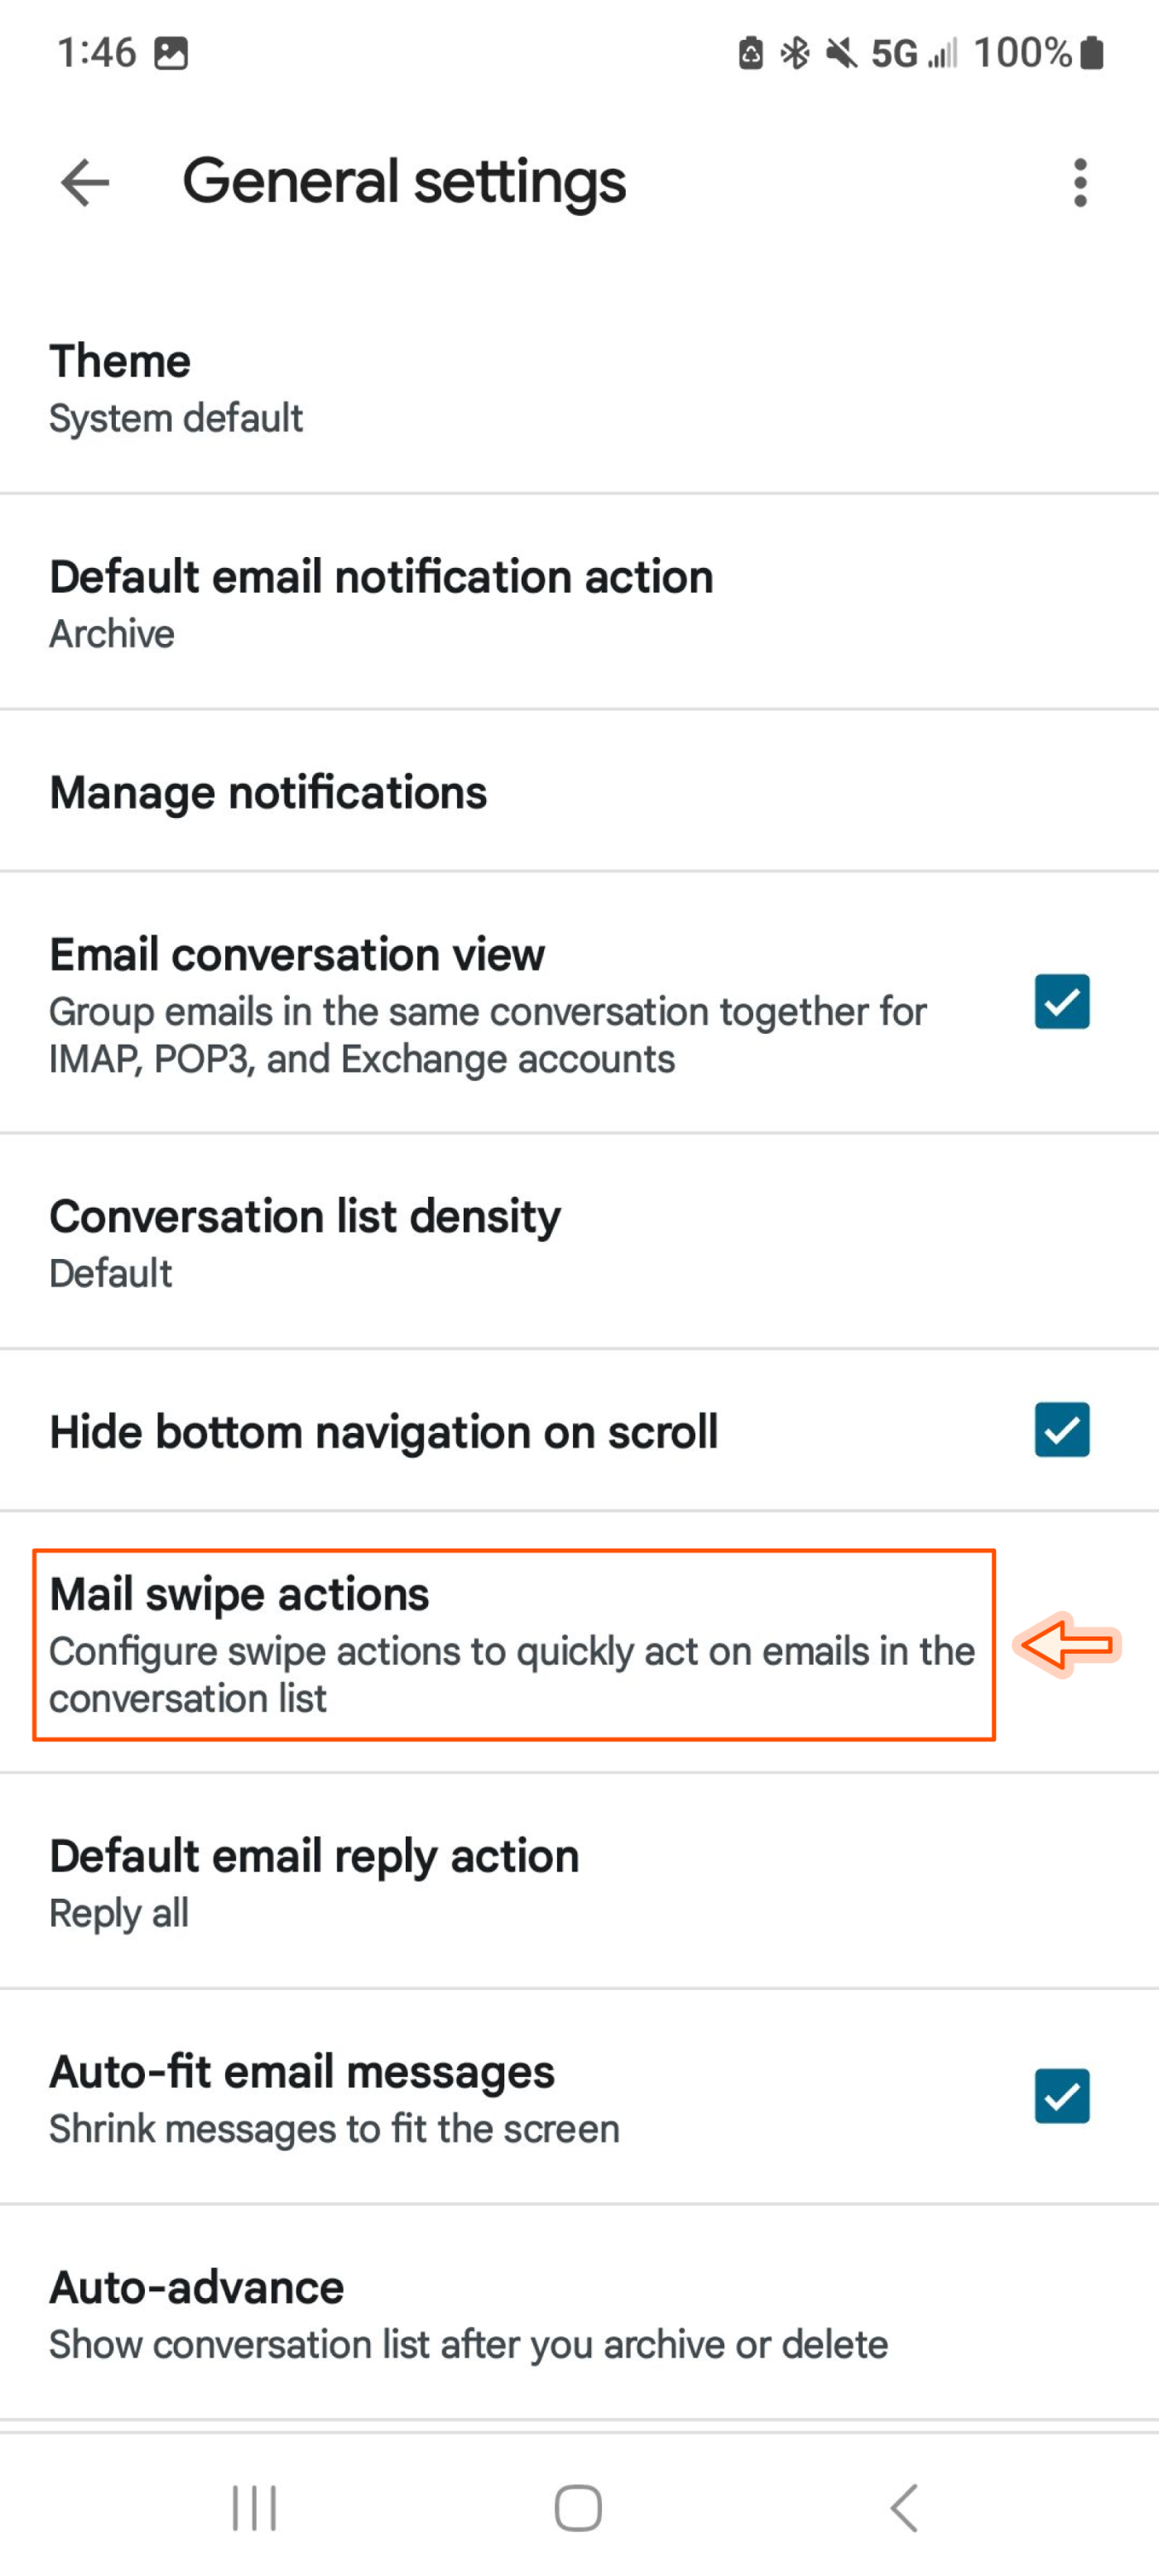 Screenshot of mail swipe actions on Gmail app on Android.